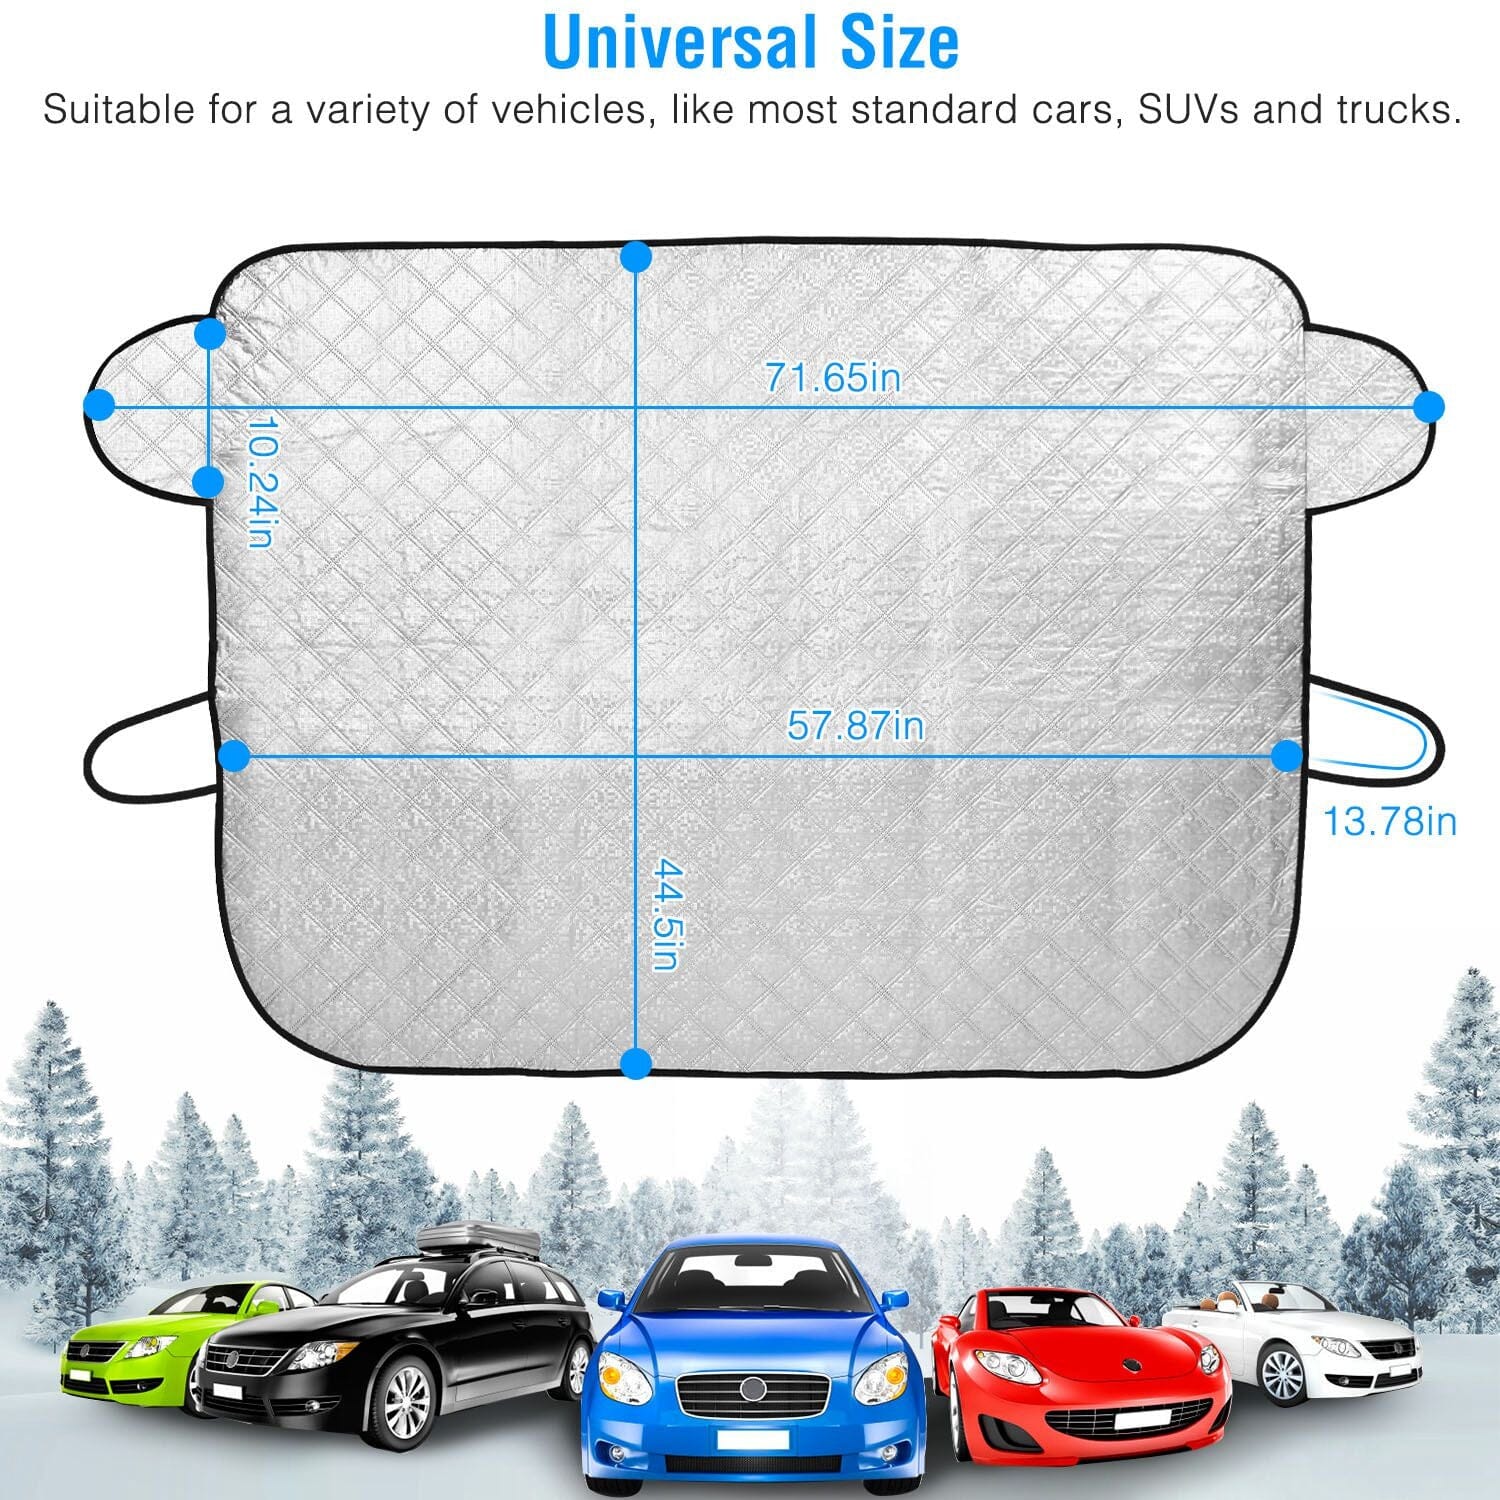 Car Windshield Snow Cover Wind-Proof Magnetic